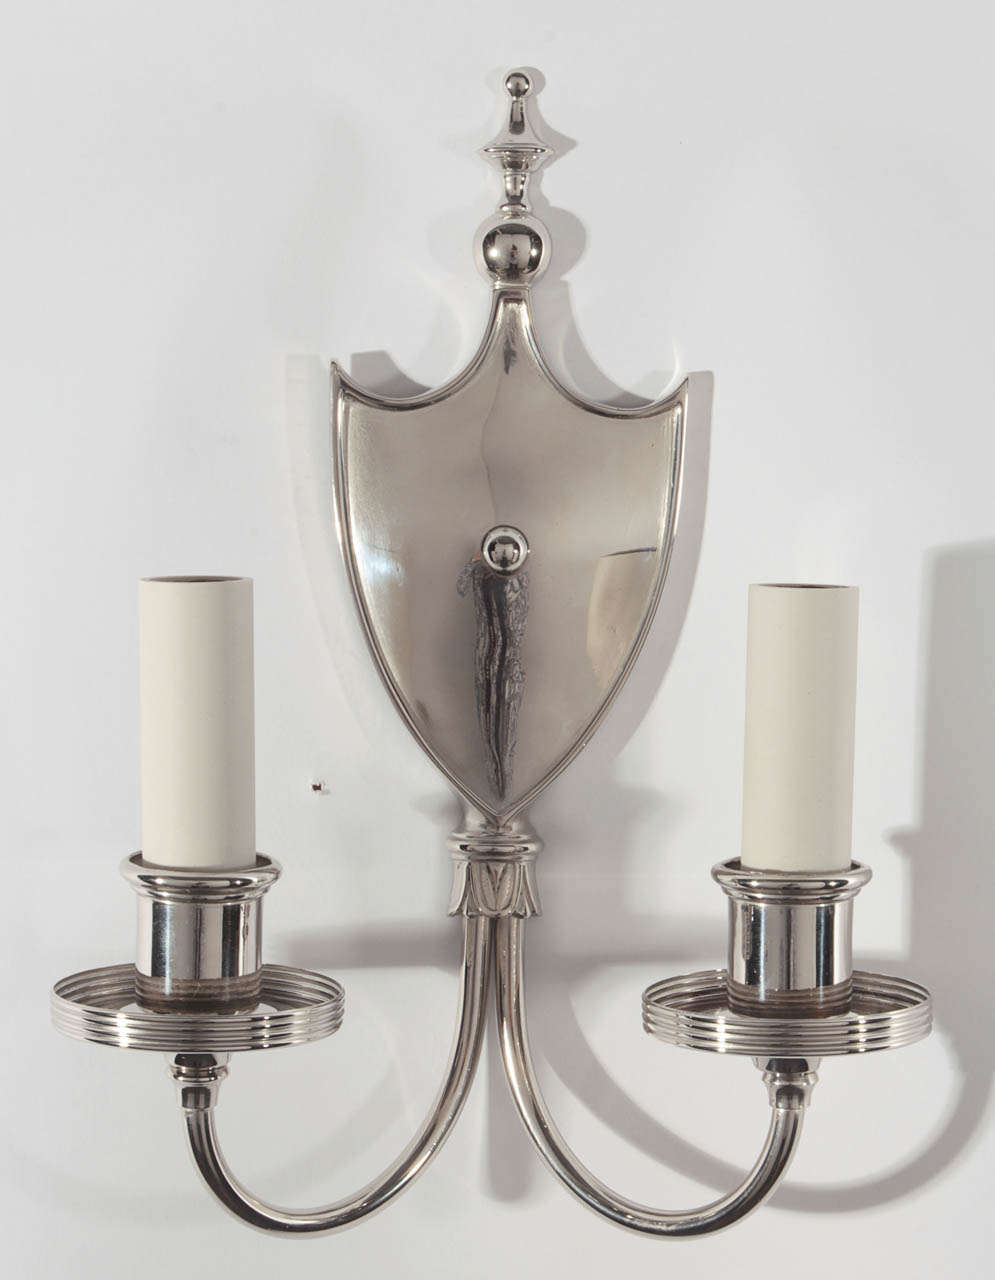 A pair of solid brass double-light sconces in with shield-form backplates in a nickel finish.

DIMENSIONS
Overall: 11-3/8